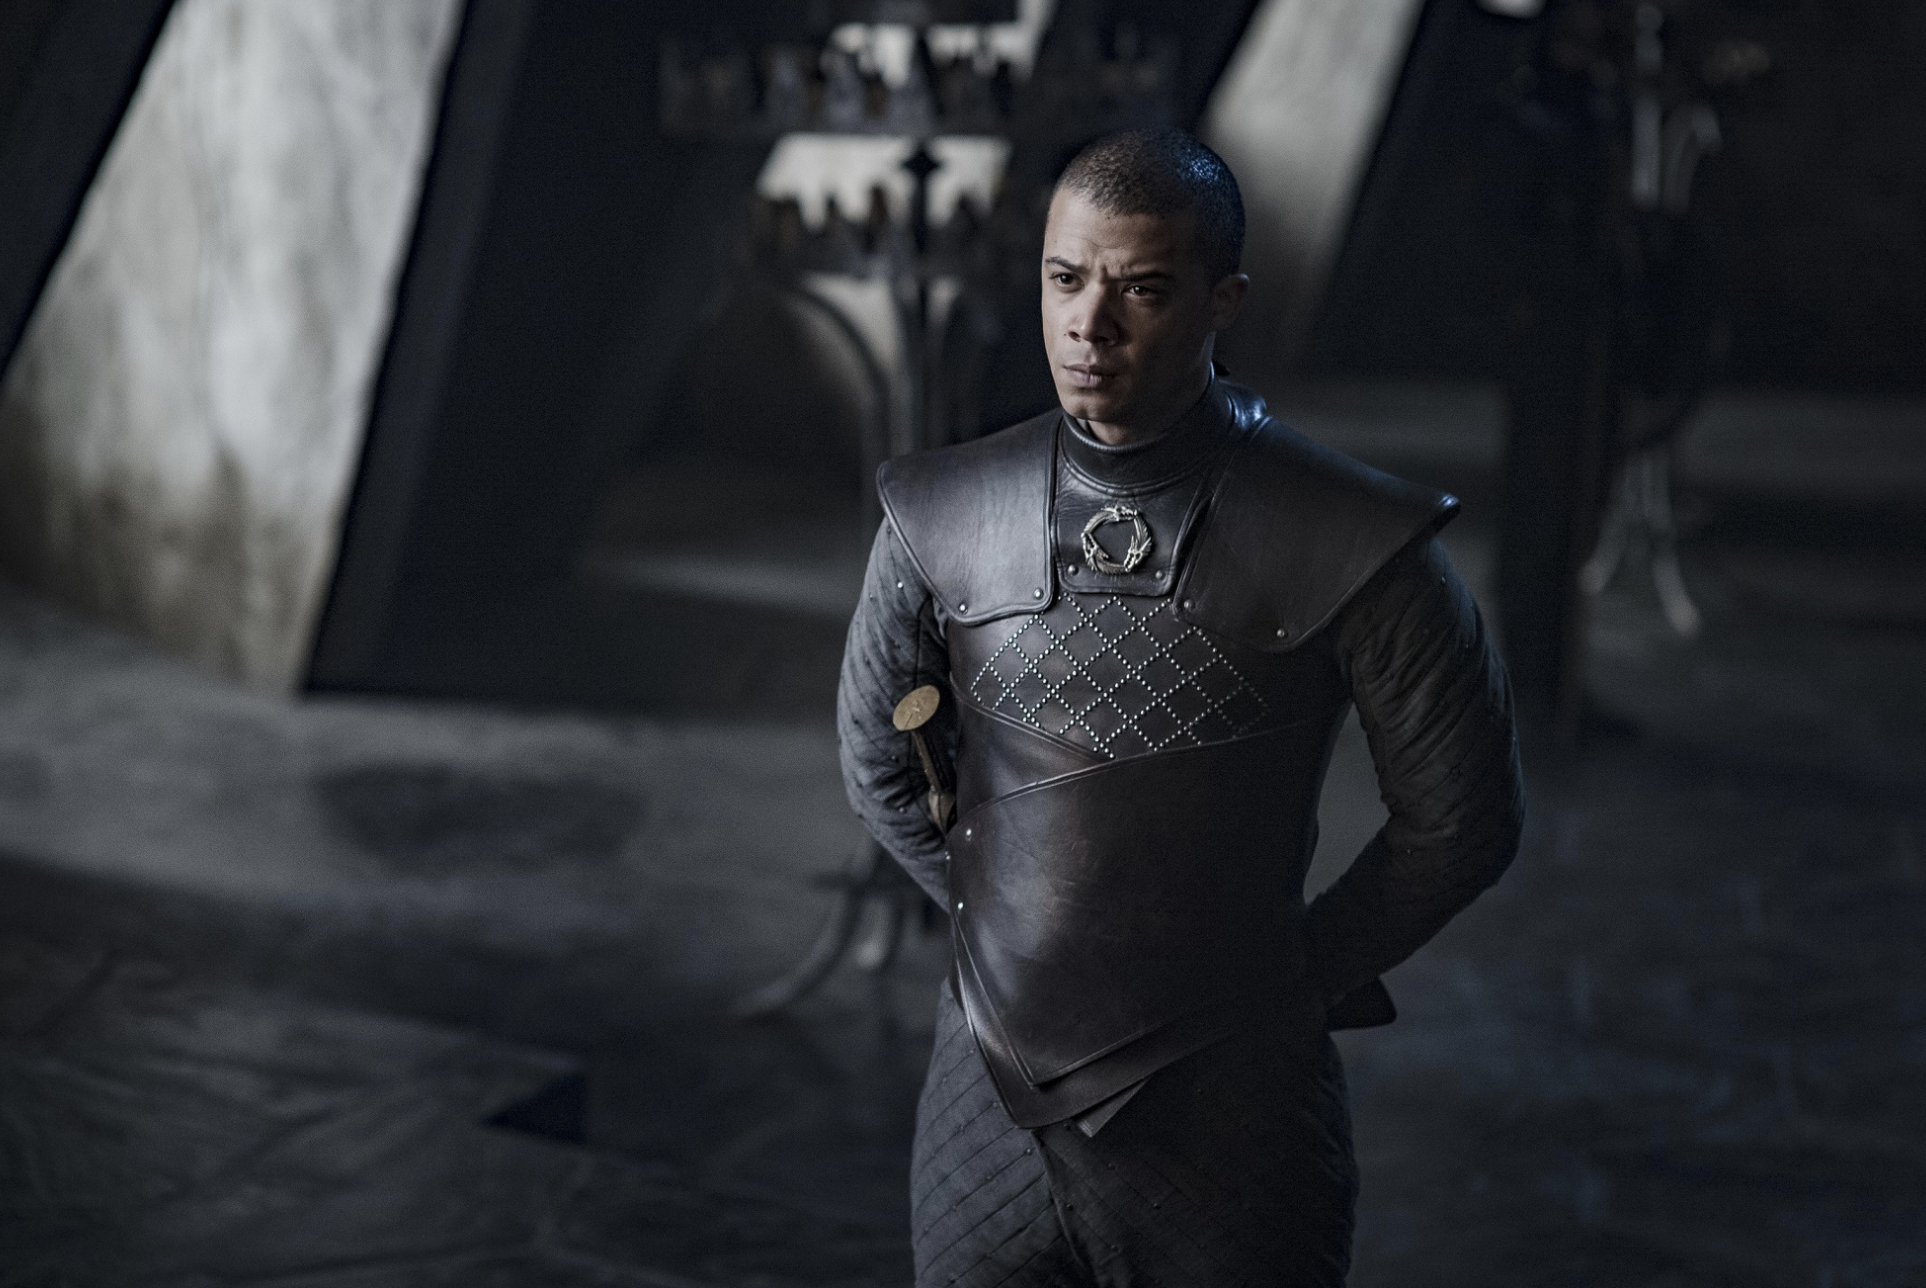 Game Of Thrones Season 8 Episode 5 First Look Photos Are Very Bad